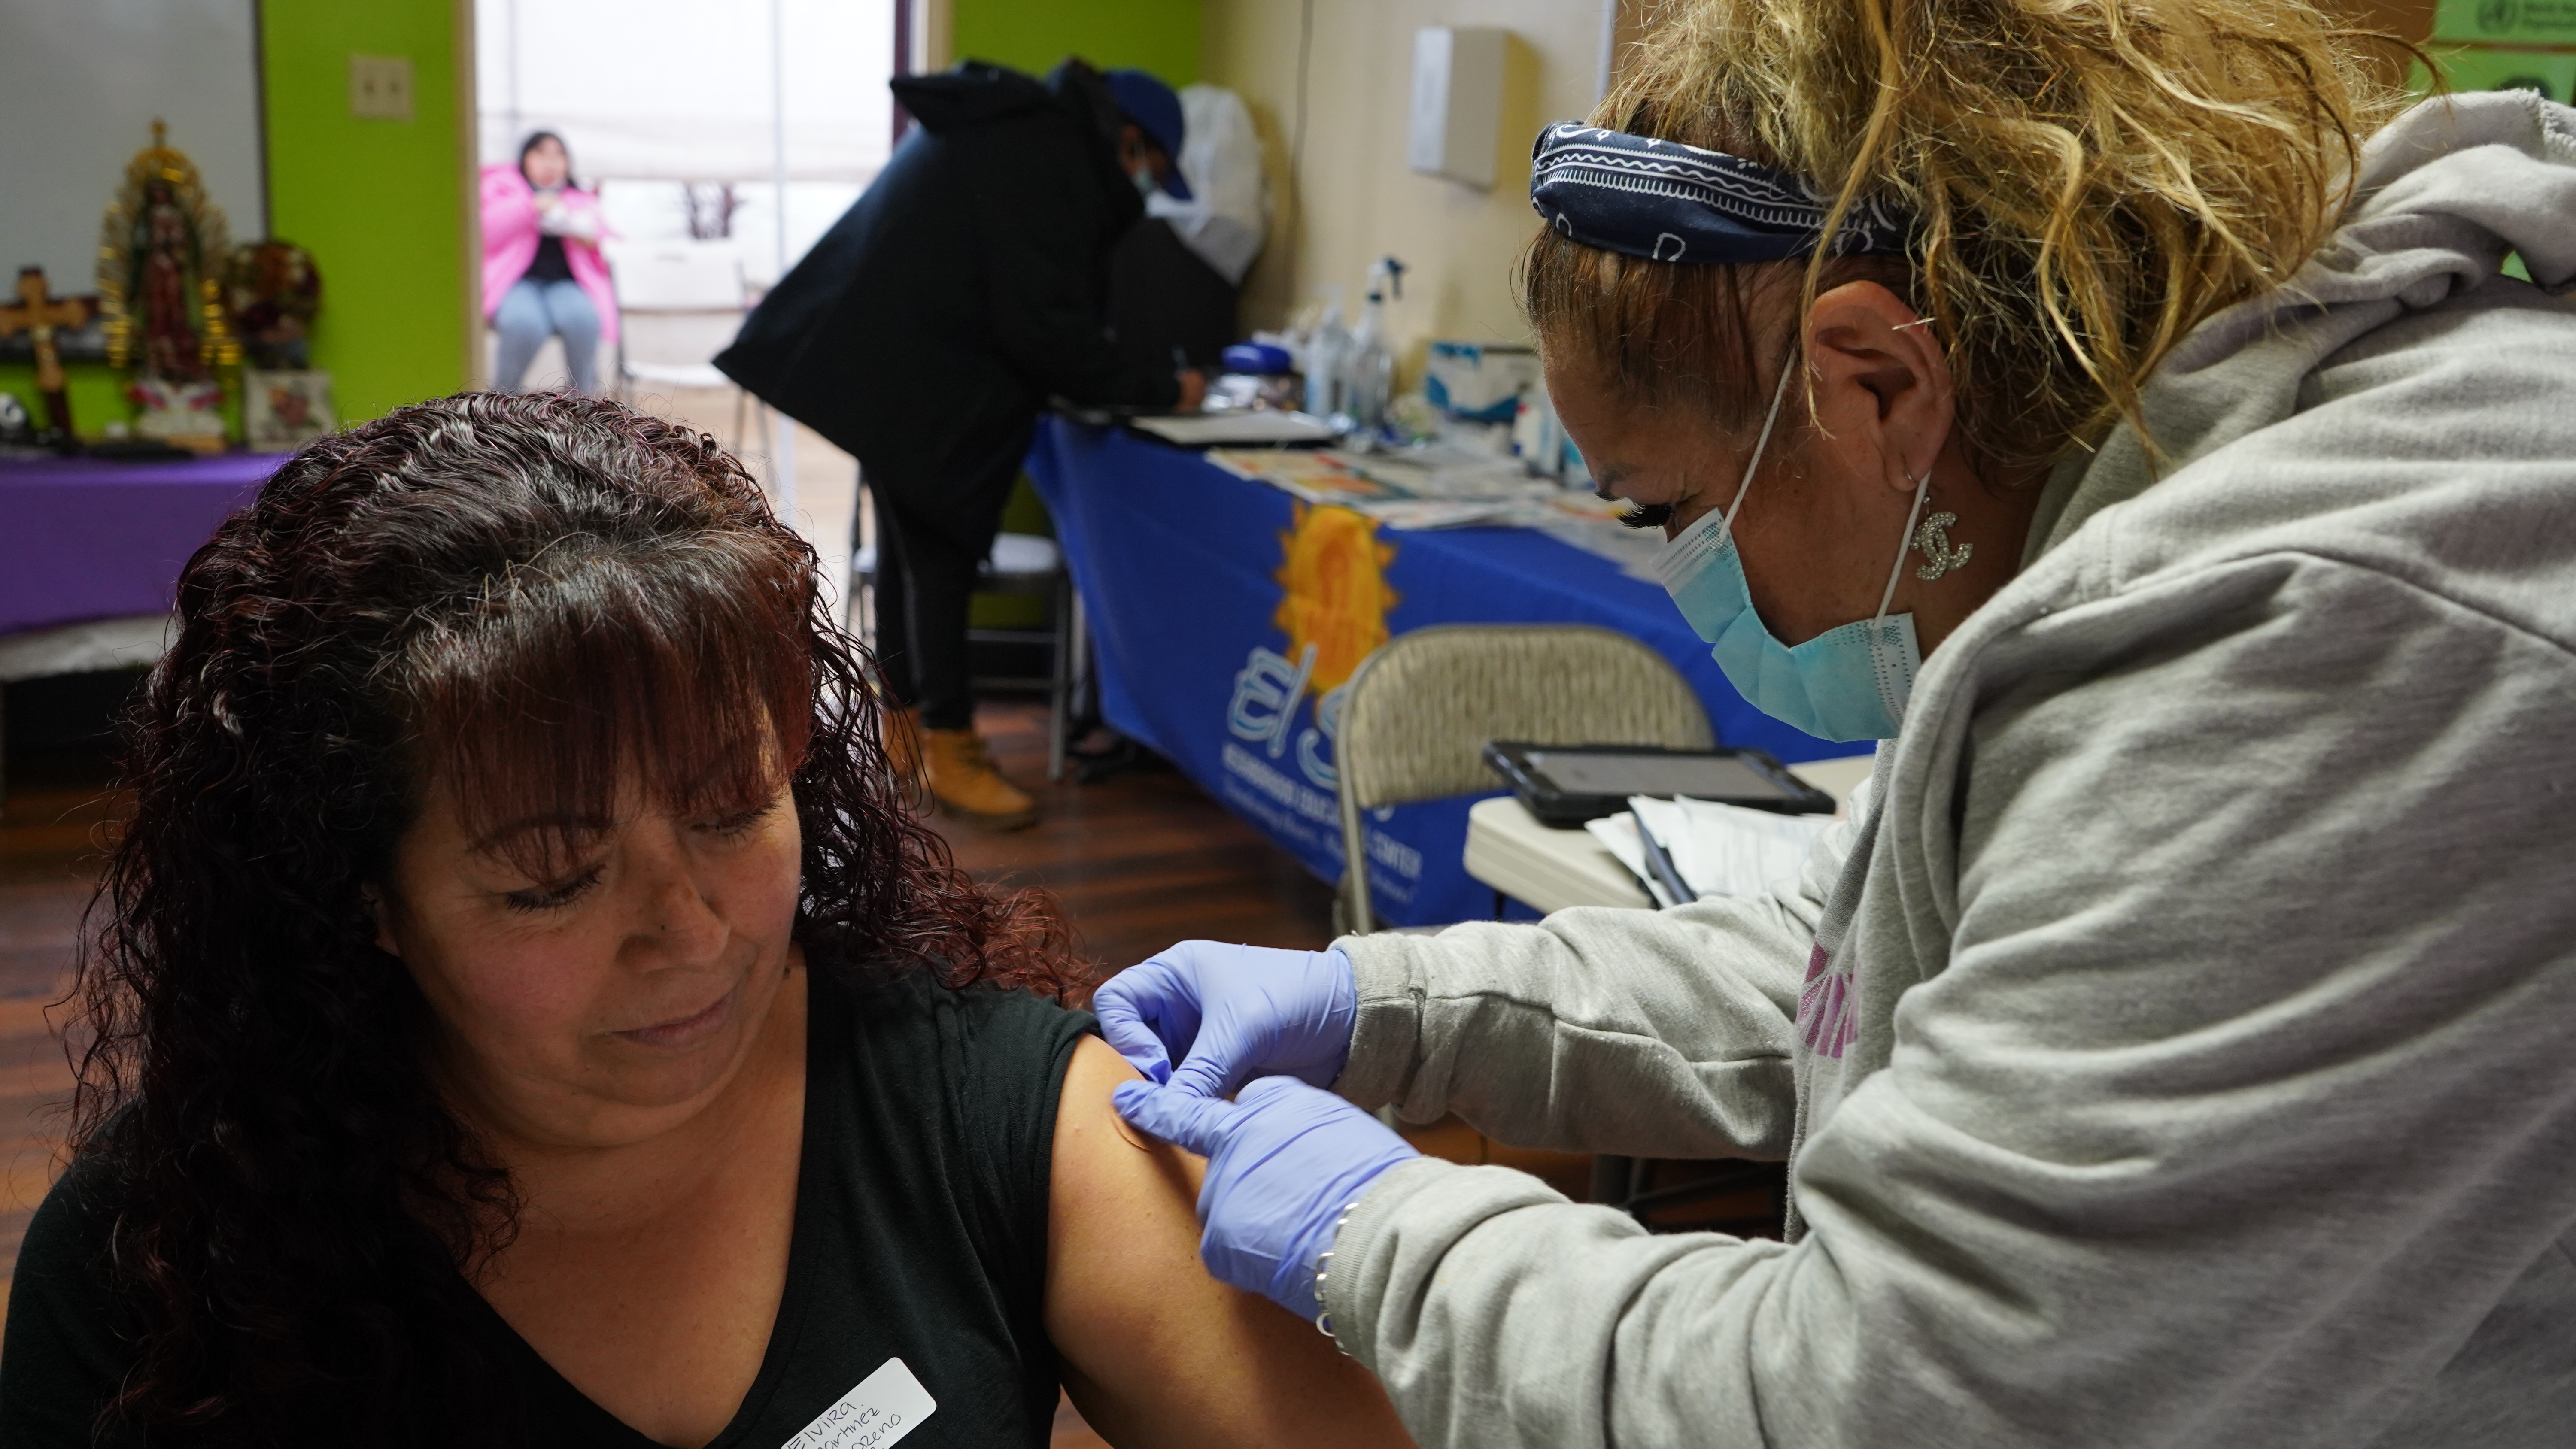 A woman gets an adhesive bandage placed on her arm by a community health worker.